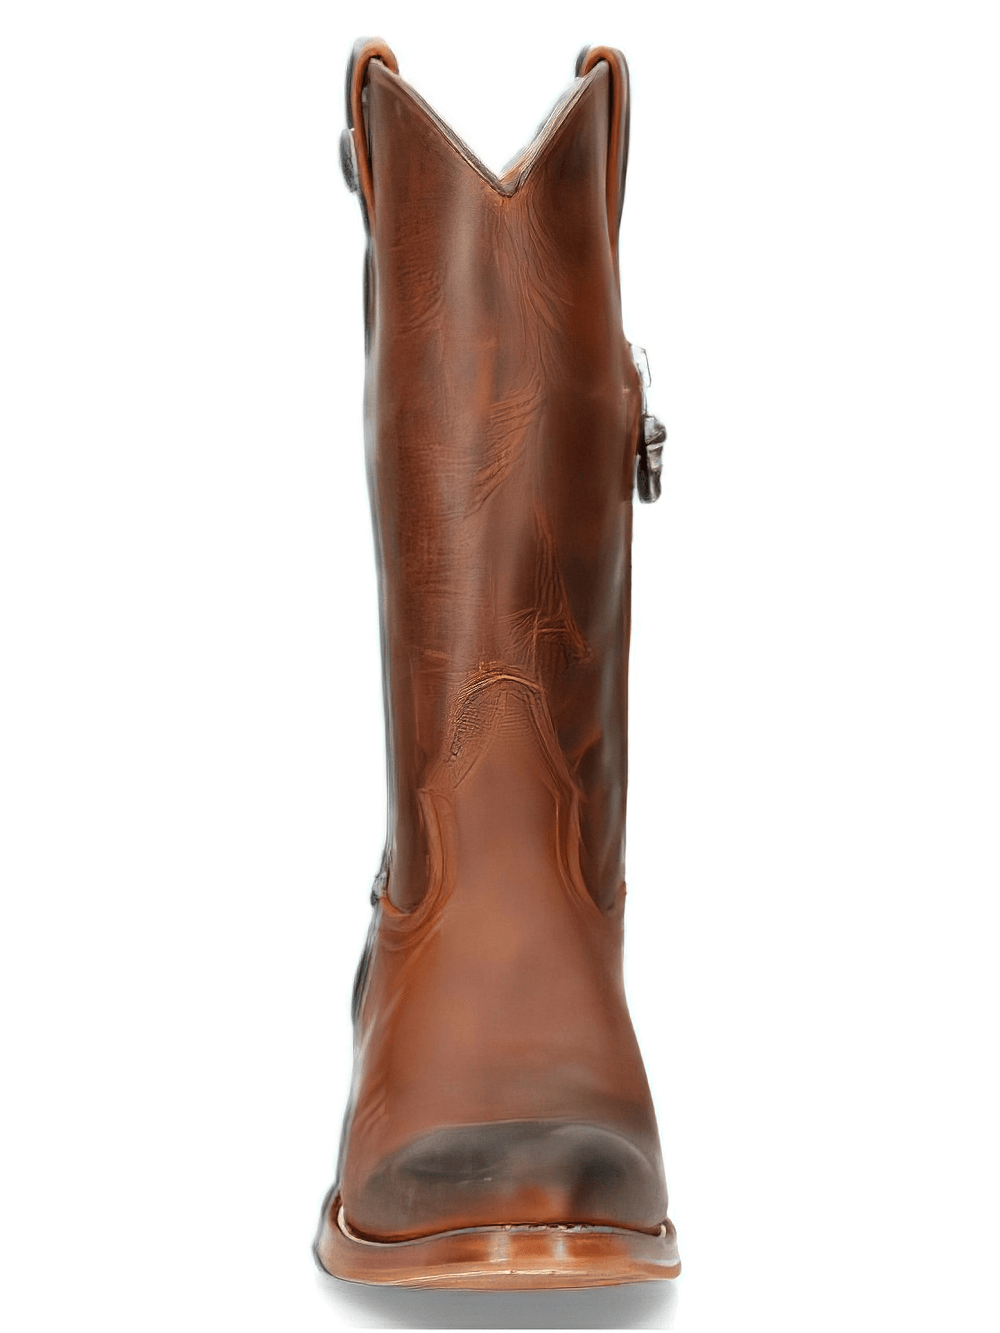 NEW ROCK Brown Leather Cowboy Boots with Zipper